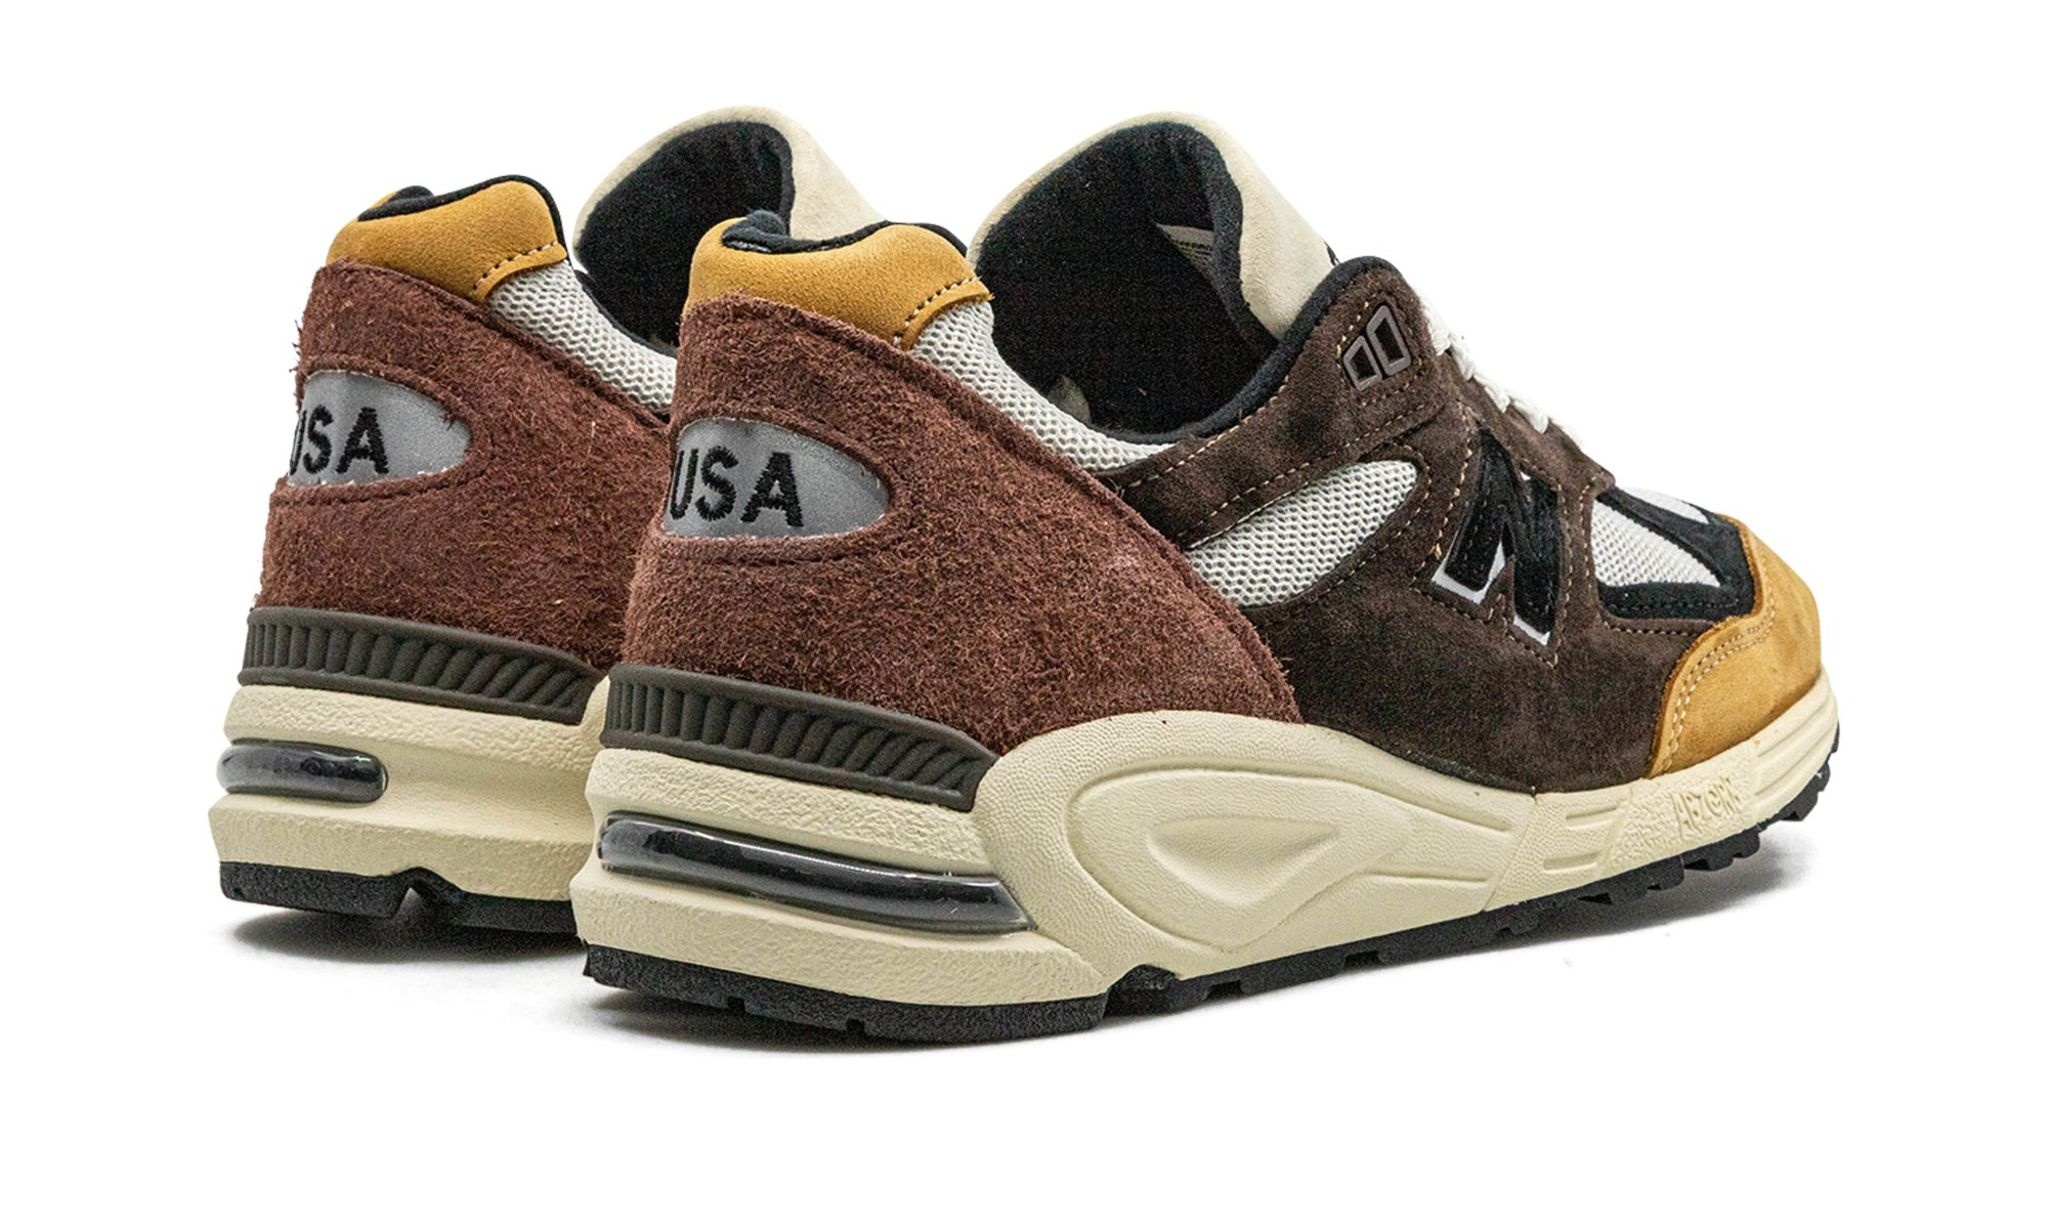 990v2 "Made In USA - Brown" - 3